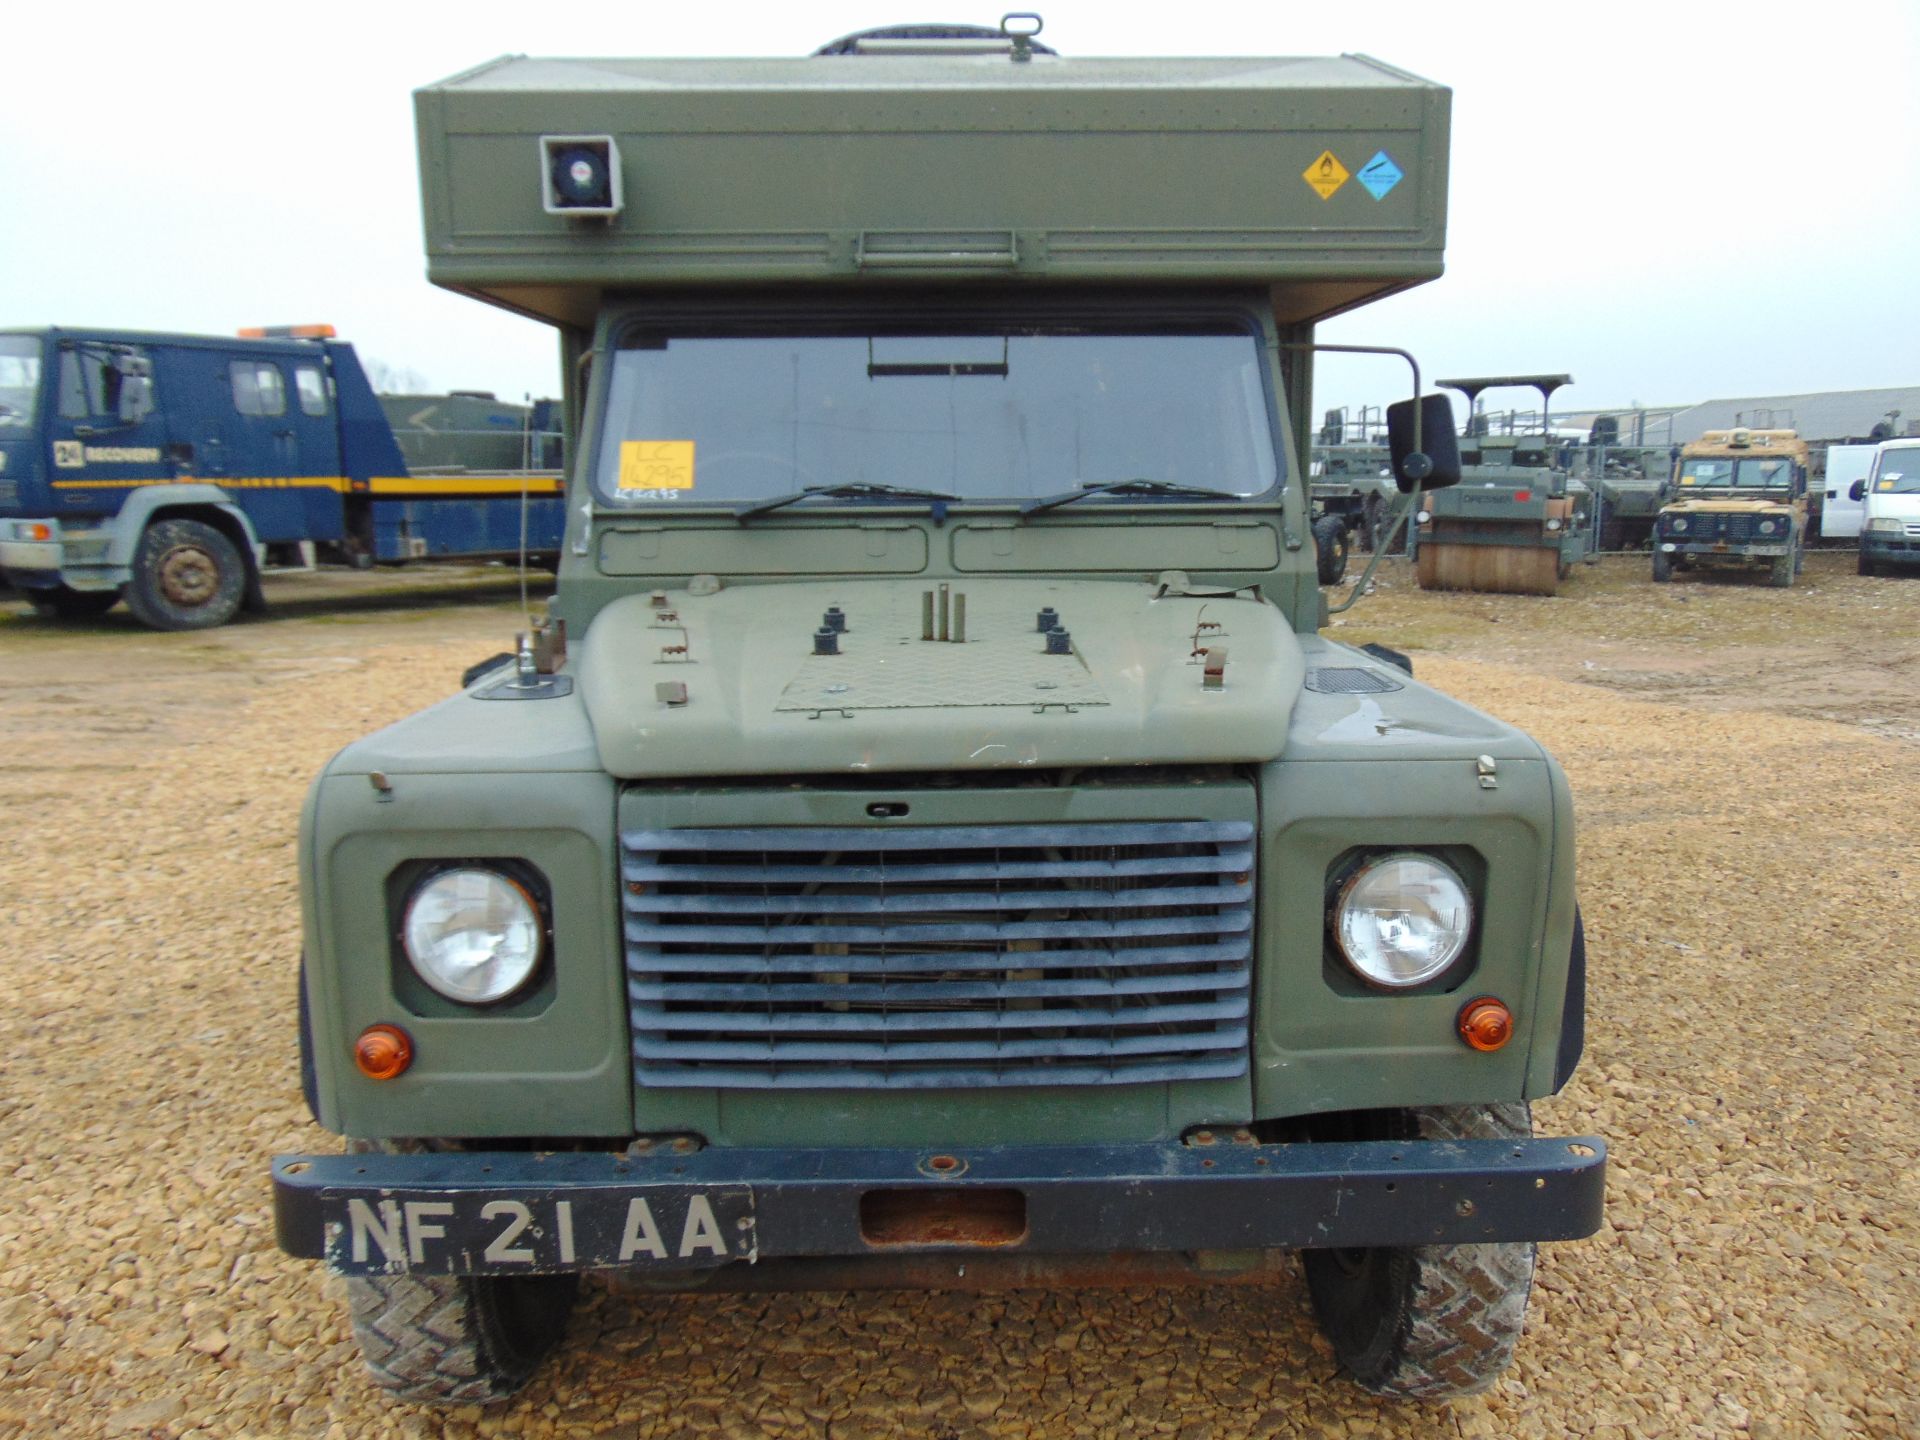 Military Specification Land Rover Wolf 130 ambulance - Image 2 of 19